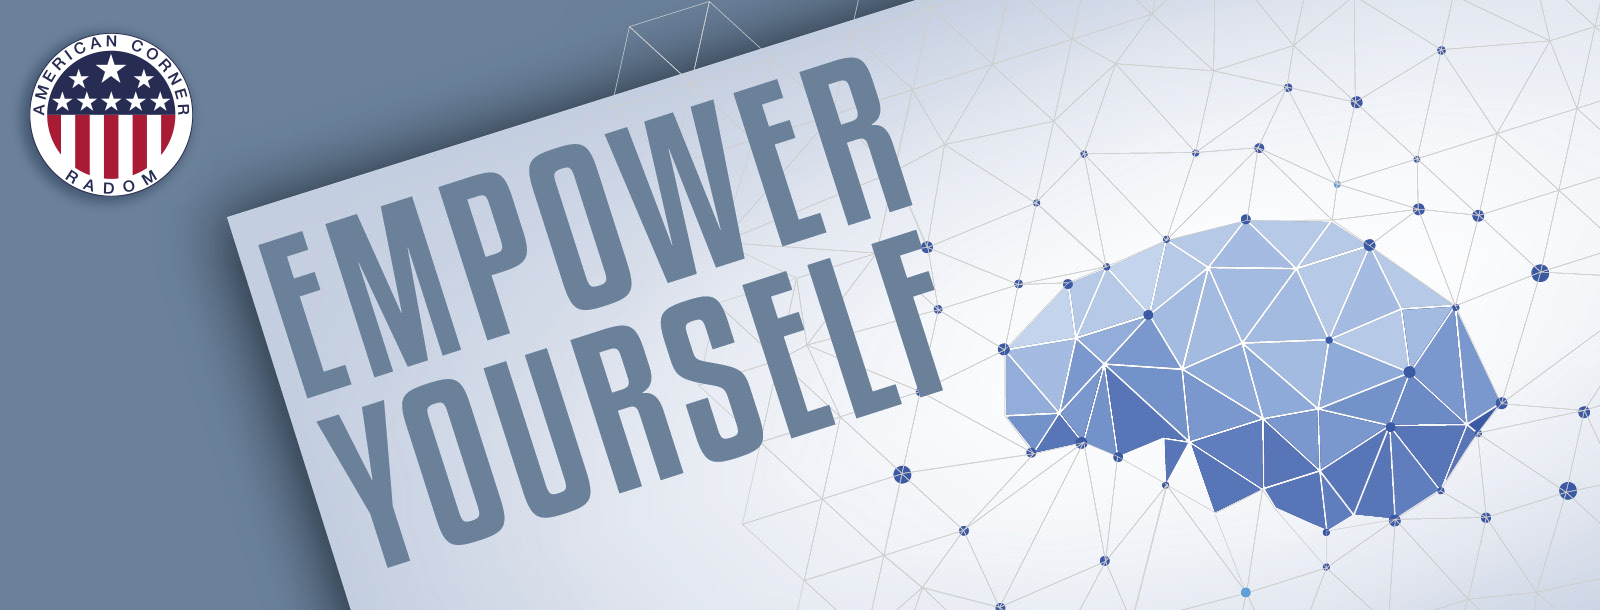 EMPOWER YOURSELF: New Year resolutions and where they can take